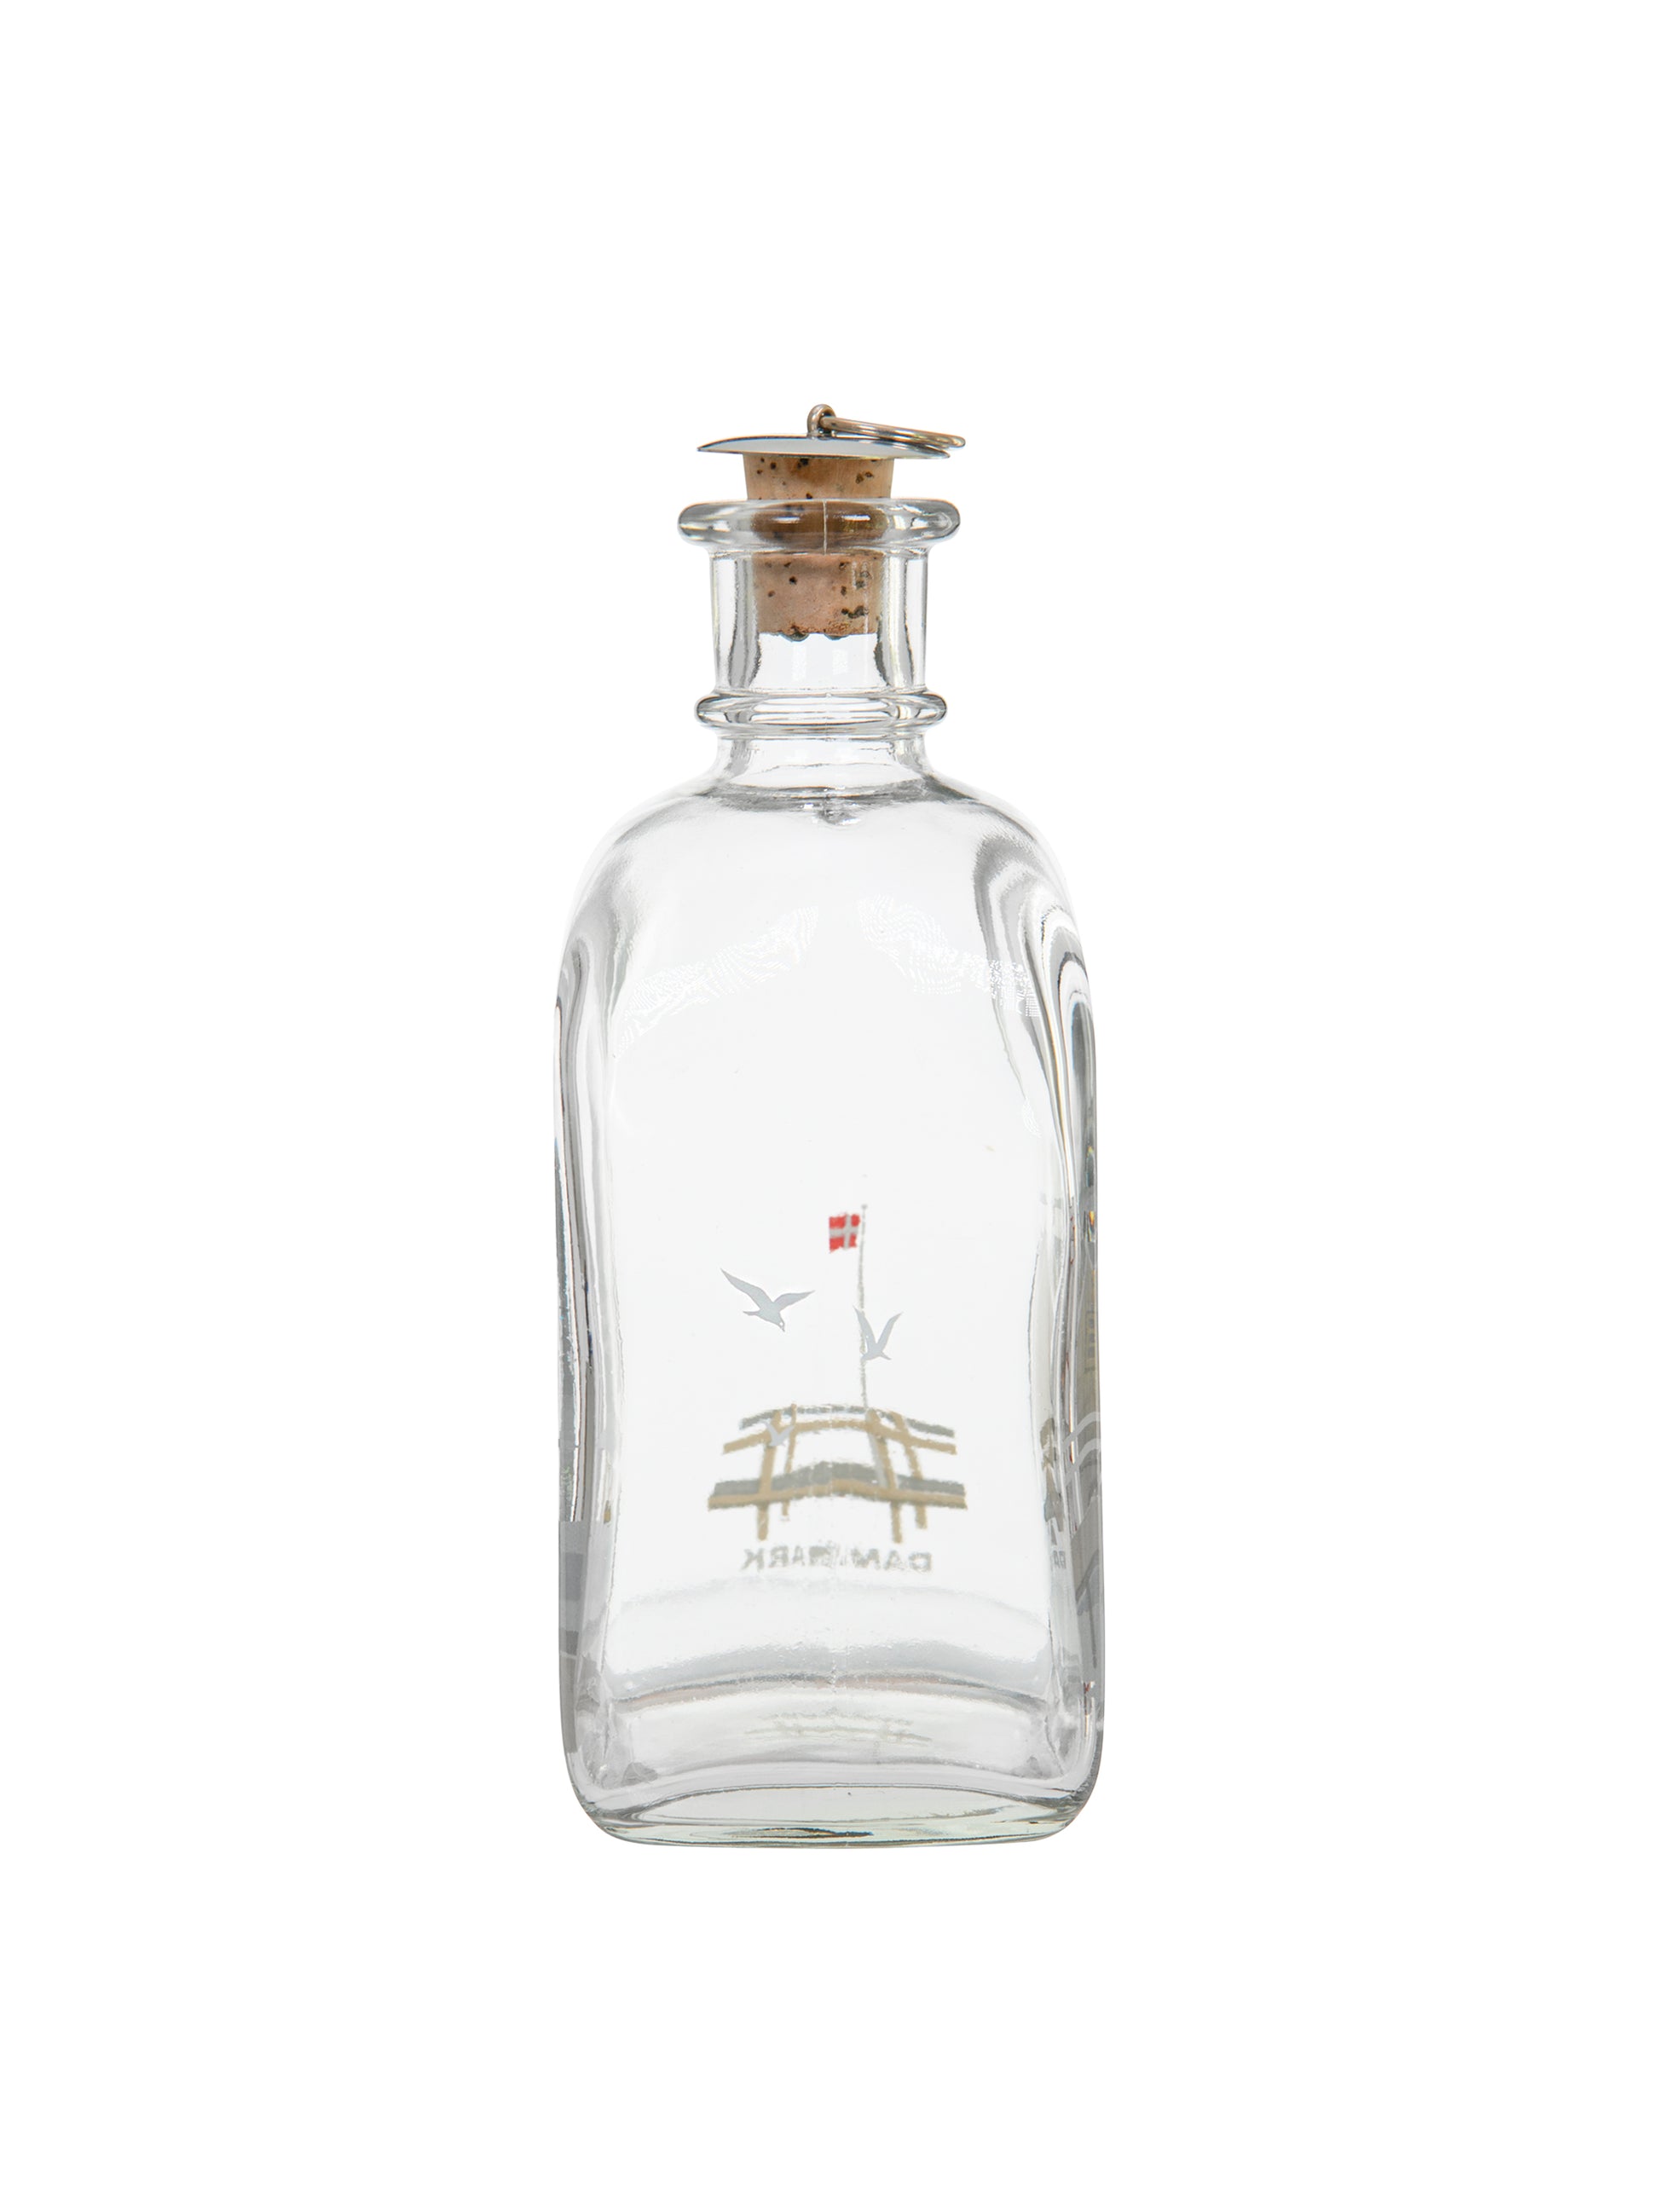 Shop the Vintage Holmegaard Christmas Church Glass Bottle at Weston Table